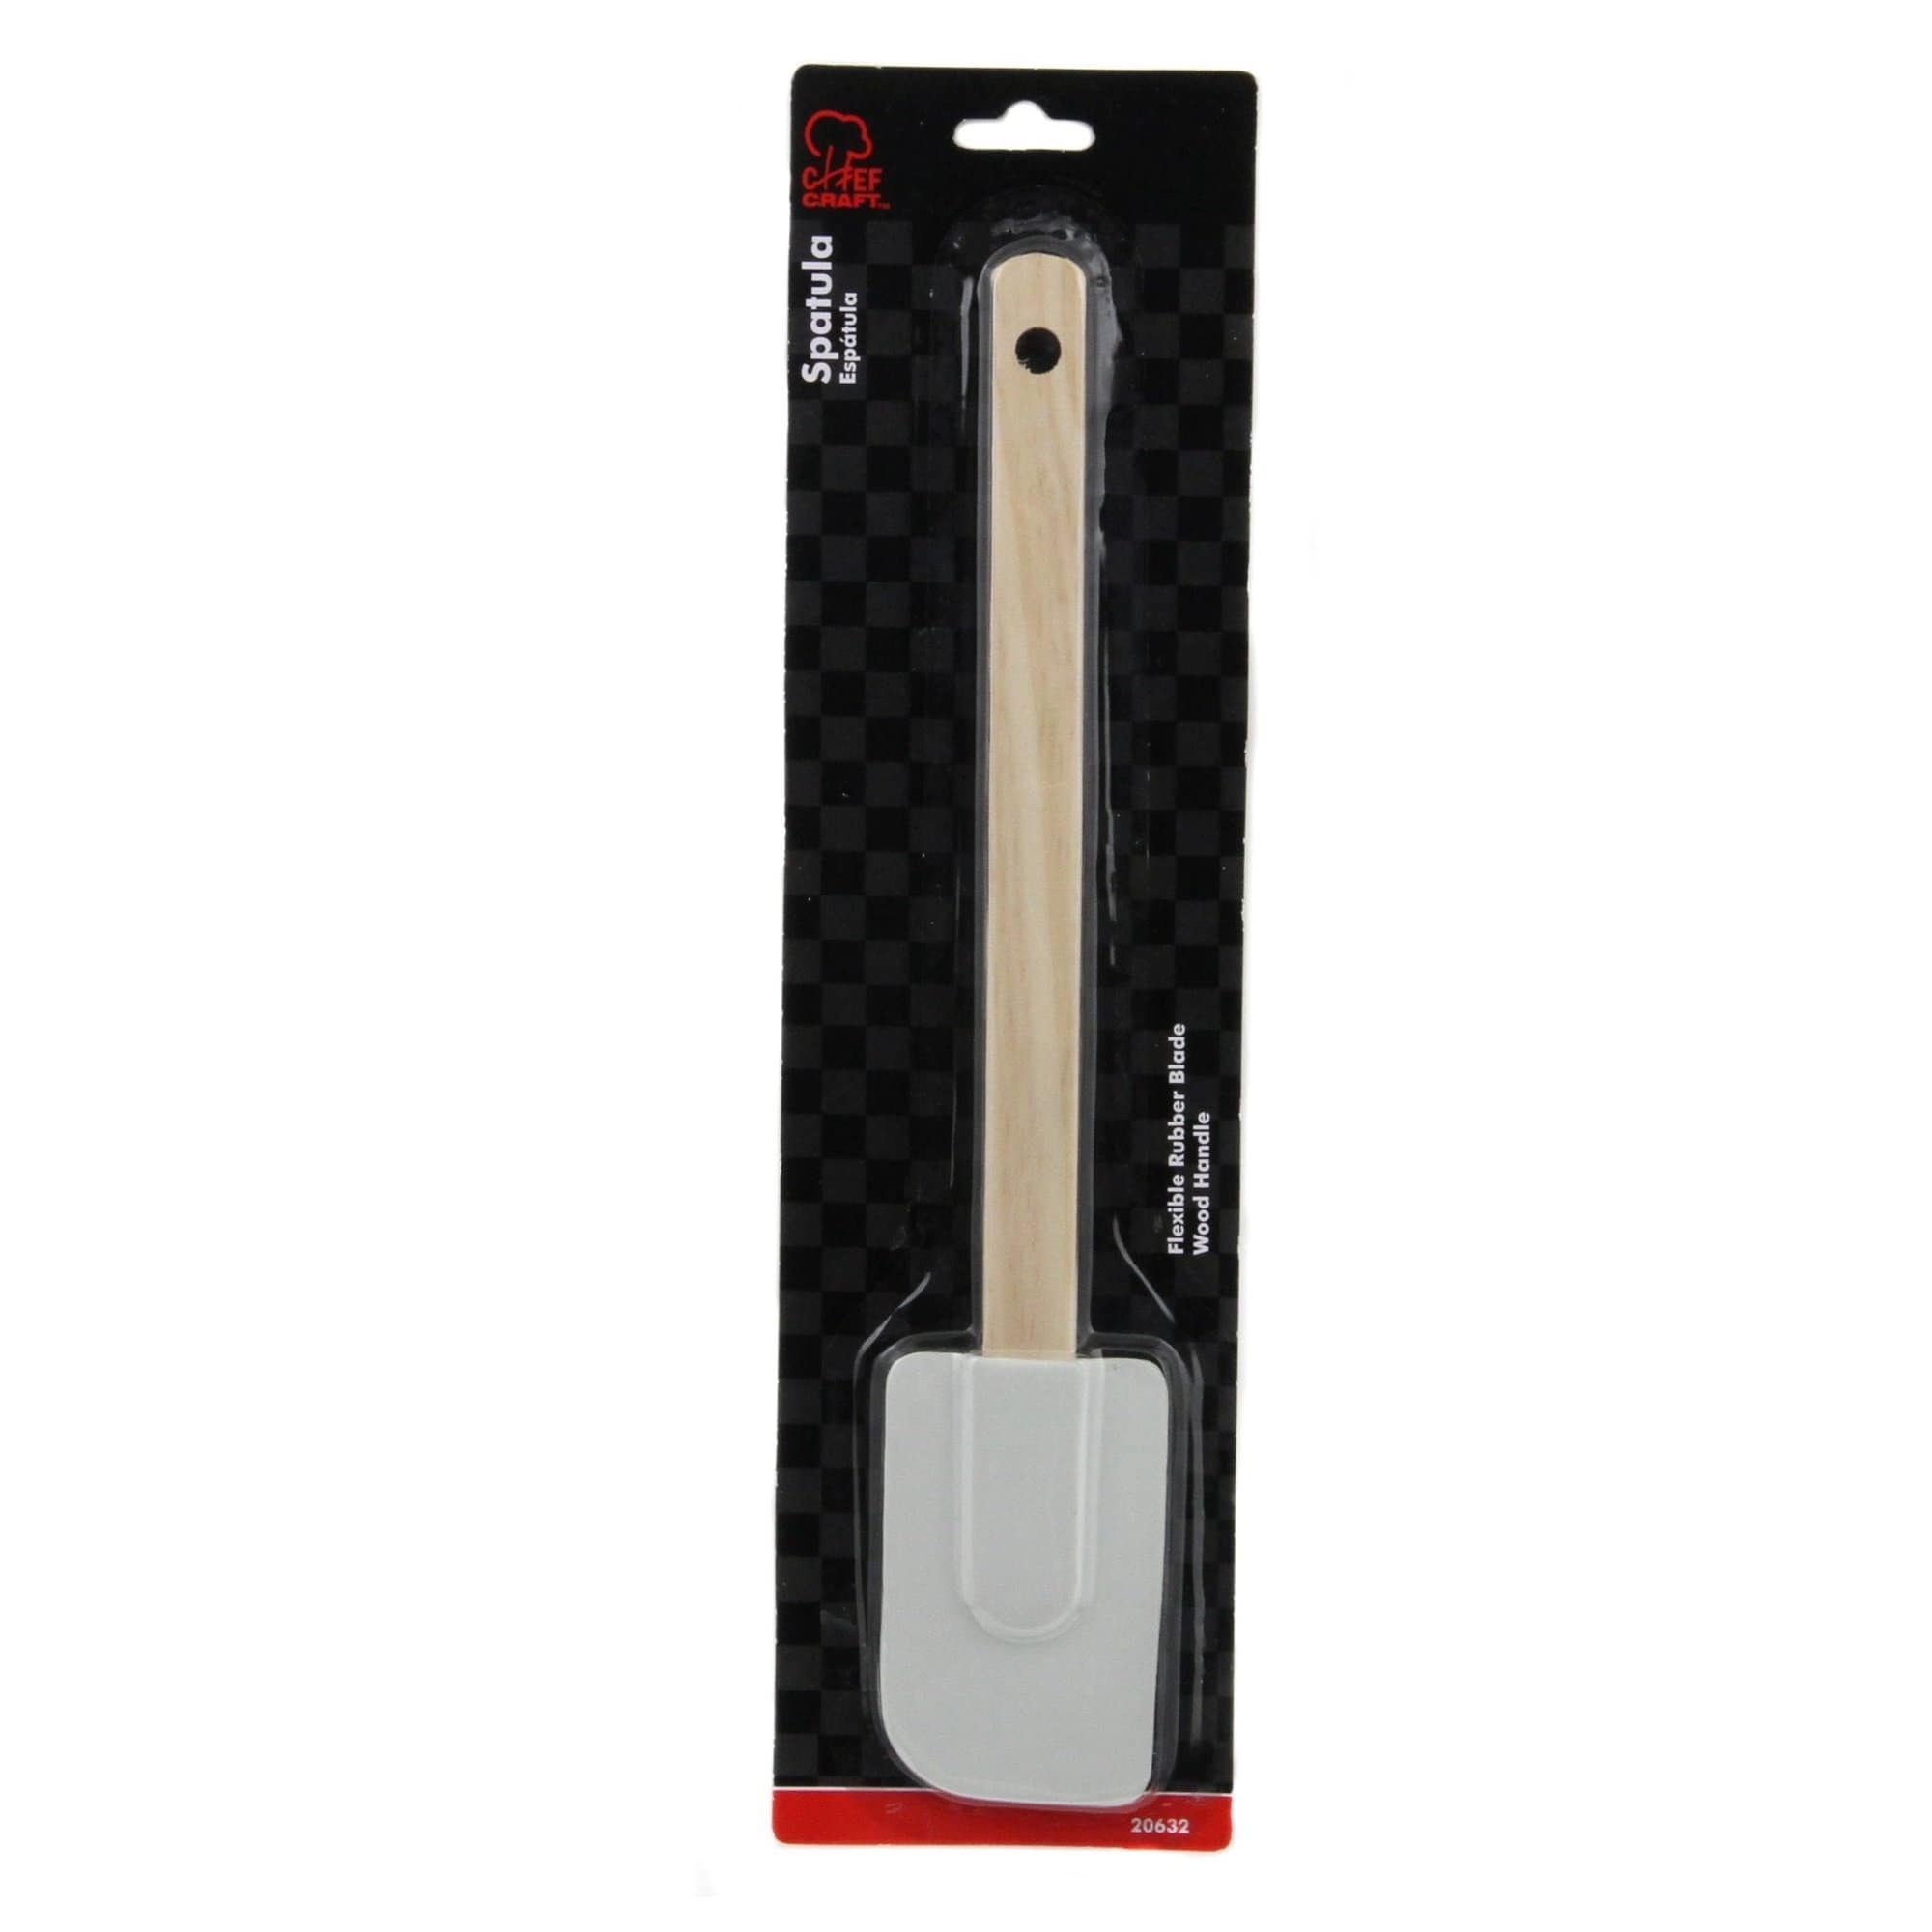 https://ak1.ostkcdn.com/images/products/is/images/direct/b72fa23b6bd1b4e9d859875cf26f47a2f16593b4/Chef-Craft-11%22-Wood-Handled-Spatula-with-Silicone-Blade---Great-for-Baking%2C-Mixing%2C-Scraping-Bowls-Clean.jpg